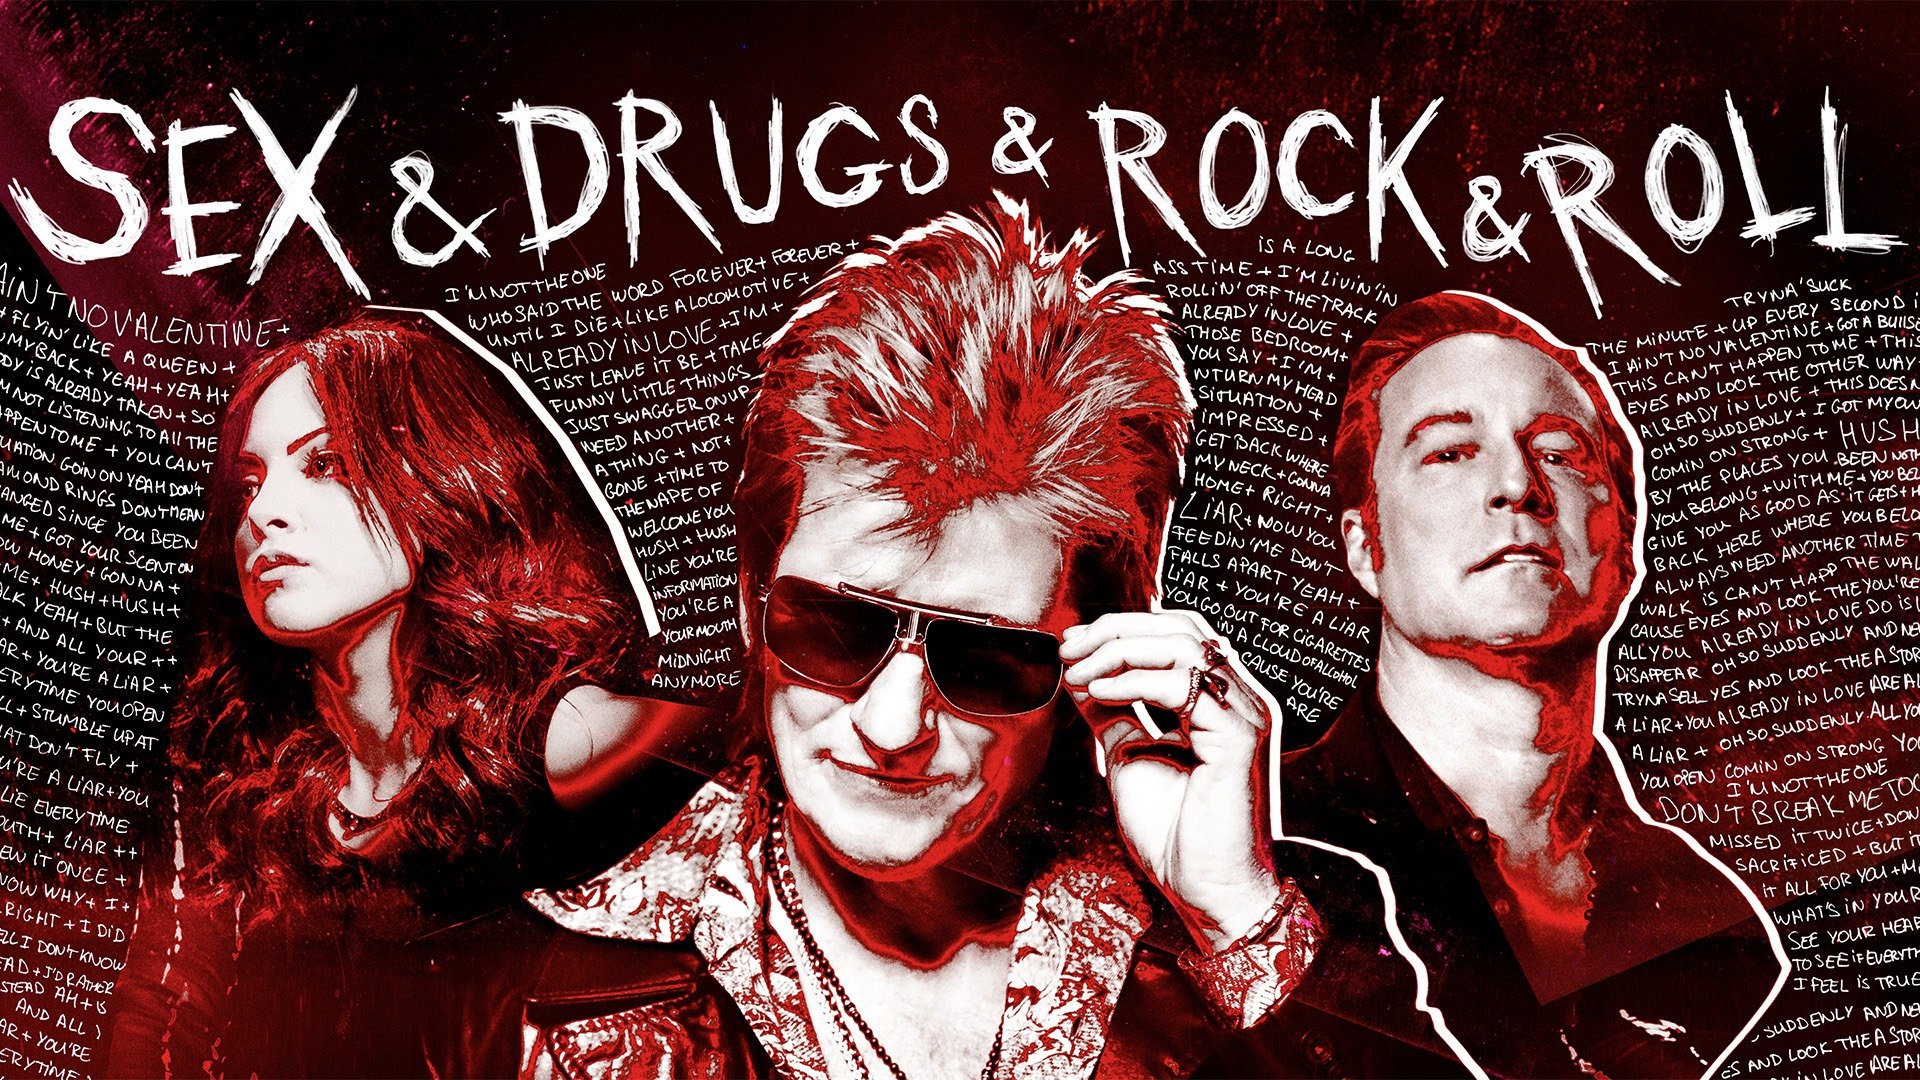 SexandDrugsandRockandRoll - FX and Hulu Series pic